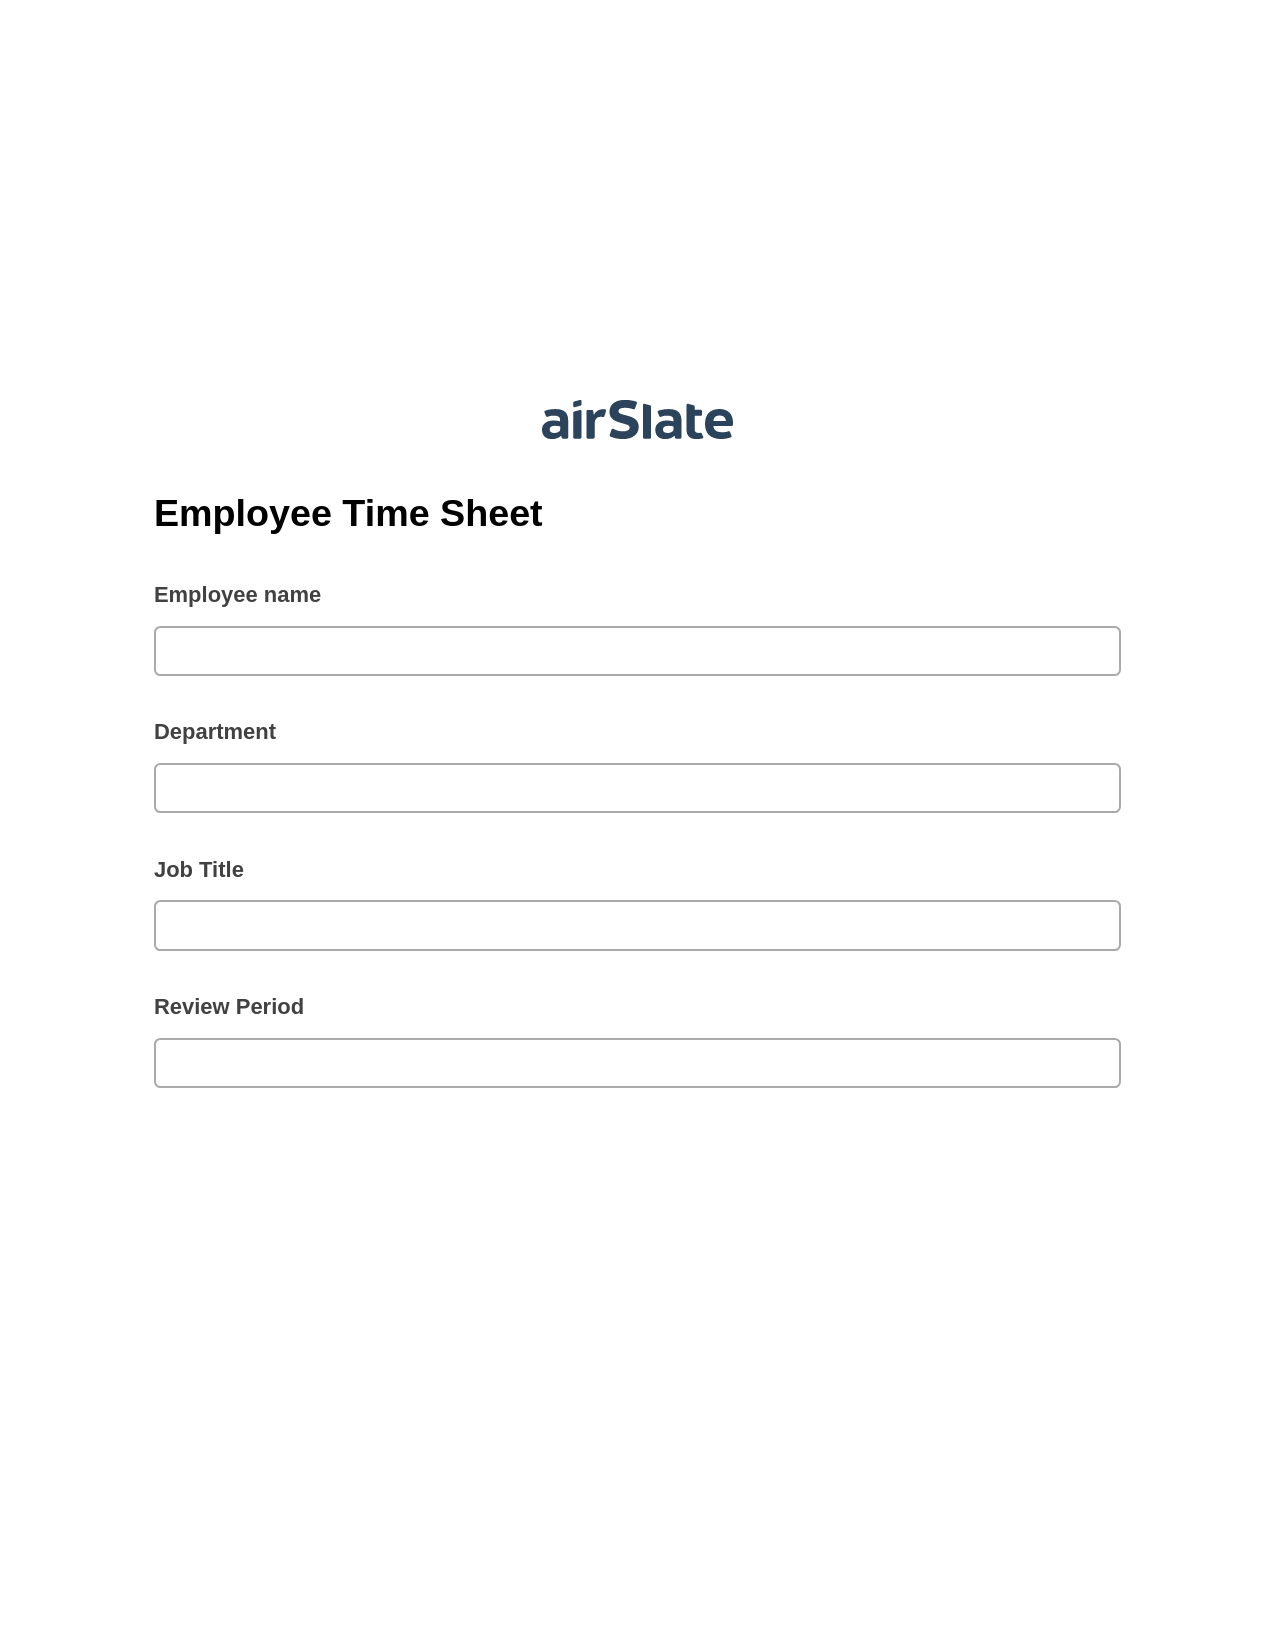 Employee Time Sheet Pre-fill from MySQL Bot, Create Salesforce Records Bot, Export to Smartsheet